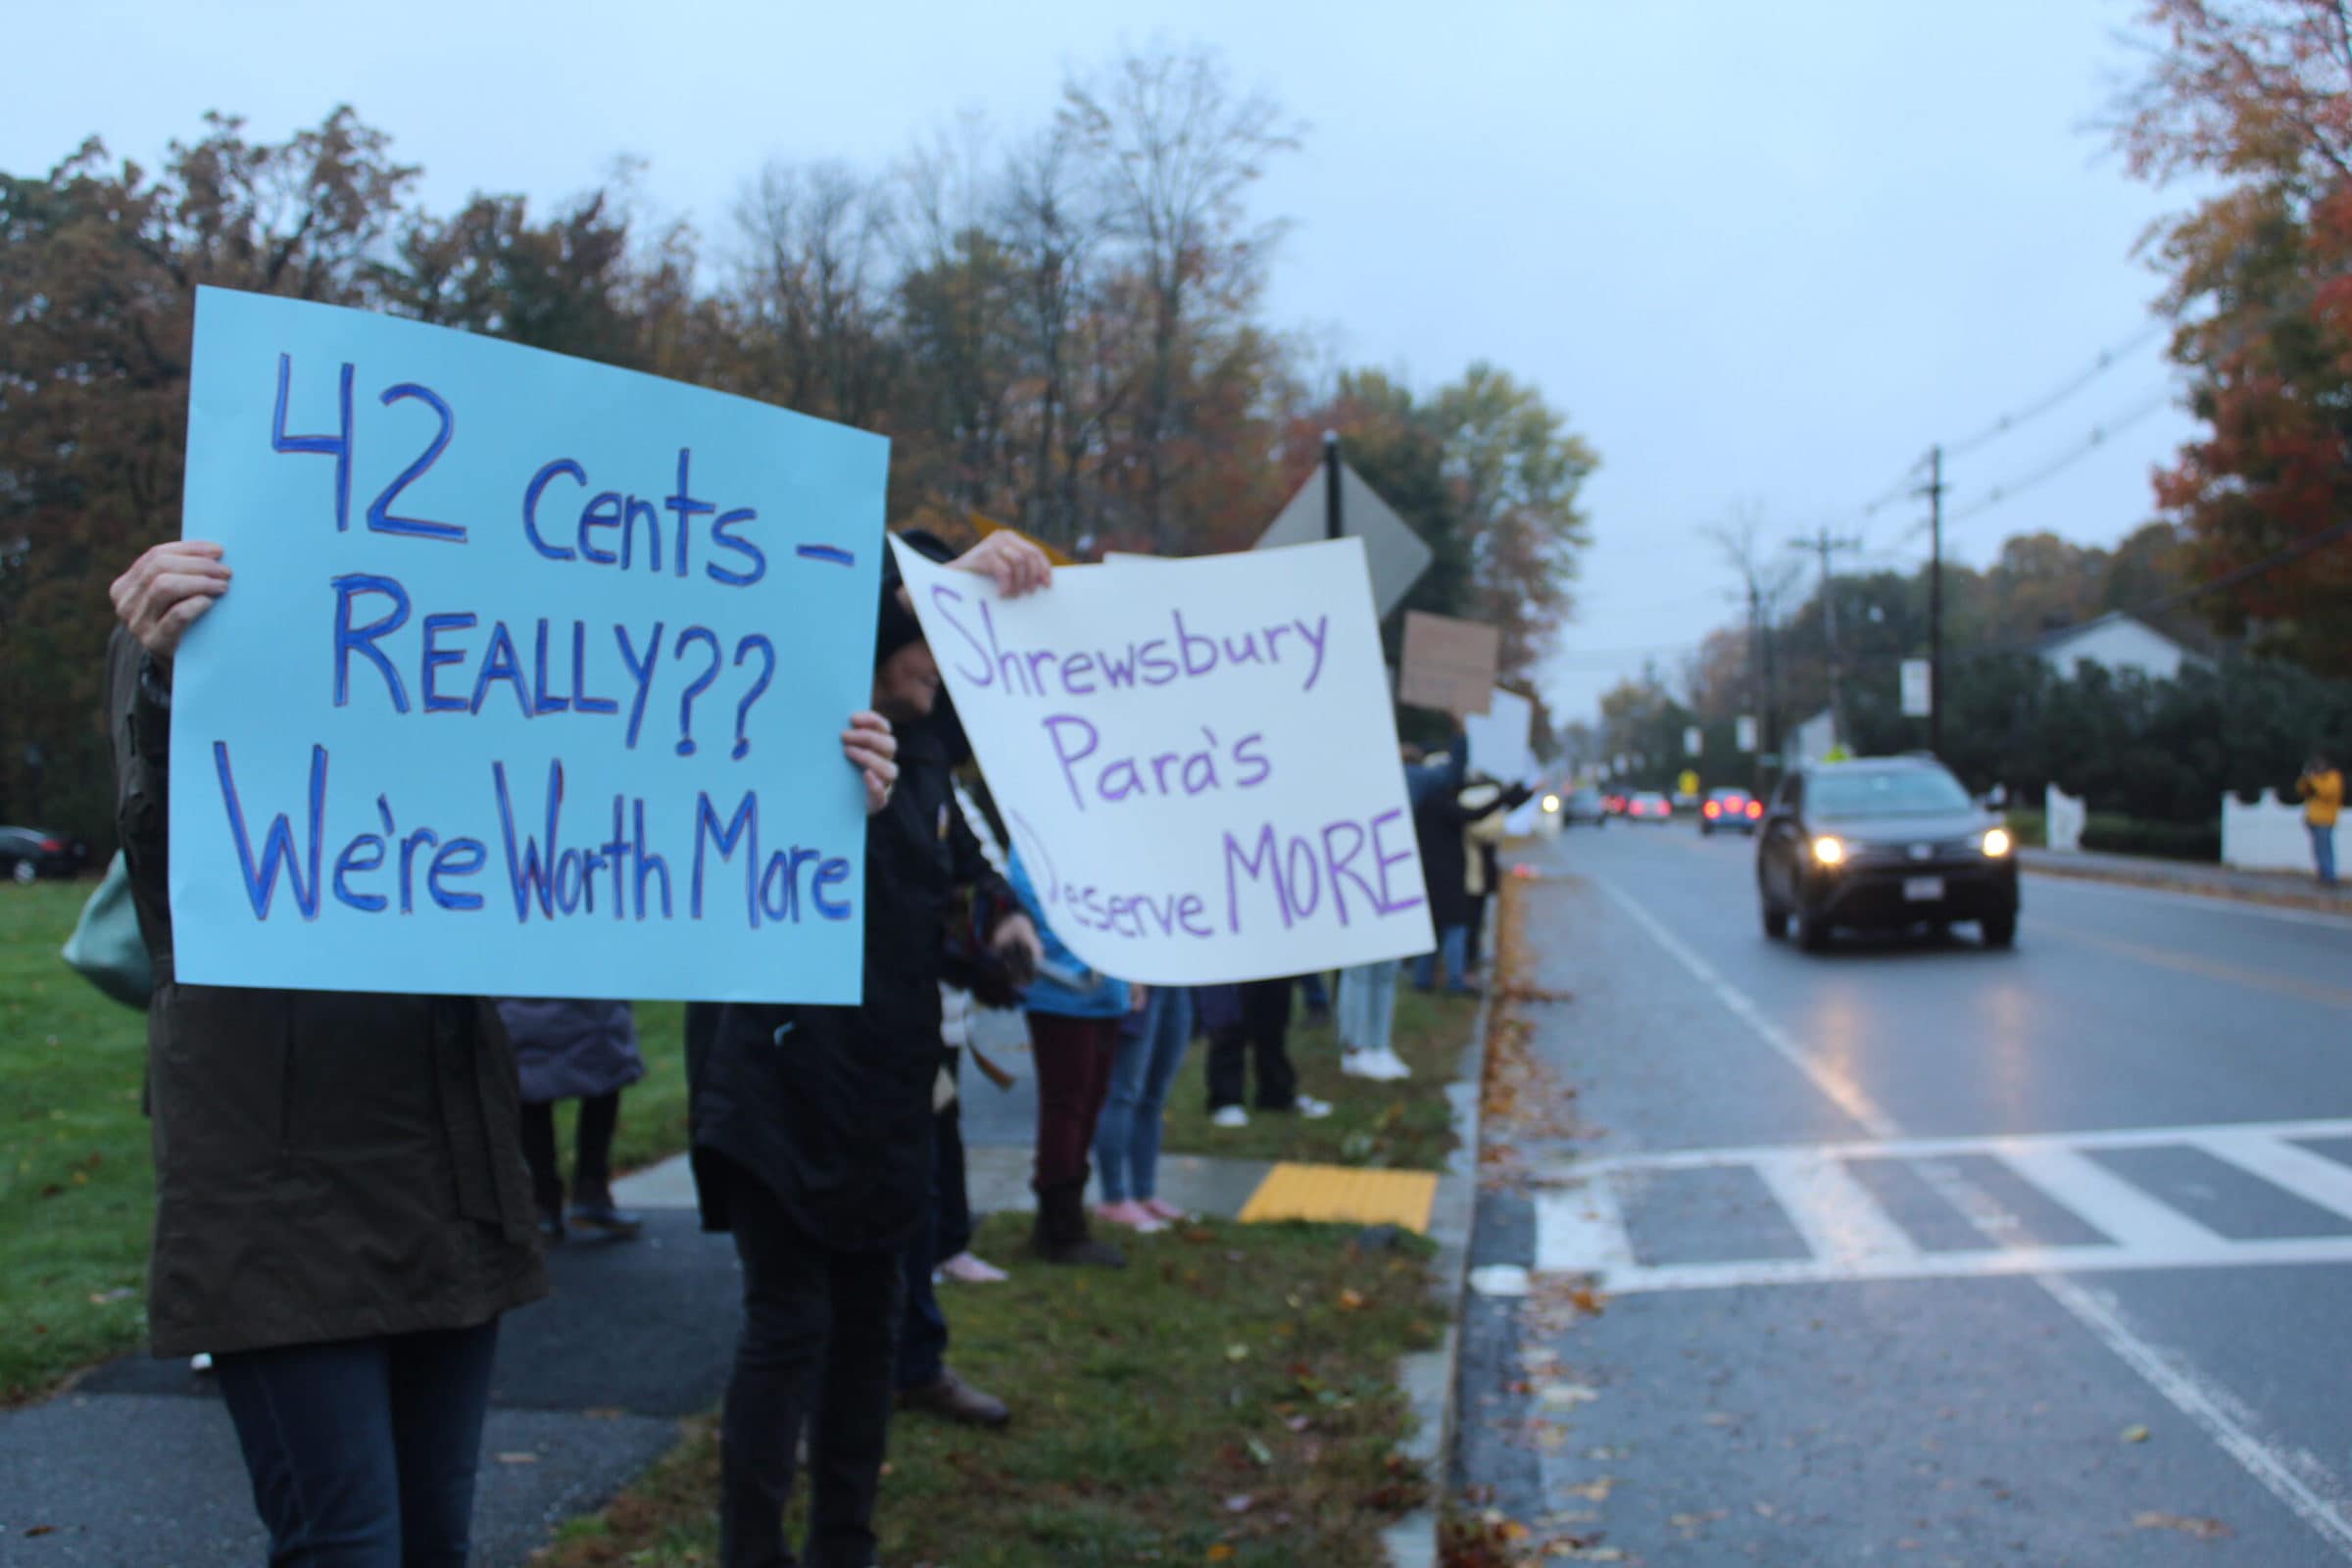 Supporters hold signs along Maple Avenue during a recent rally held by the Shrewsbury Paraprofessionals Association. (Photo/Laura Hayes)